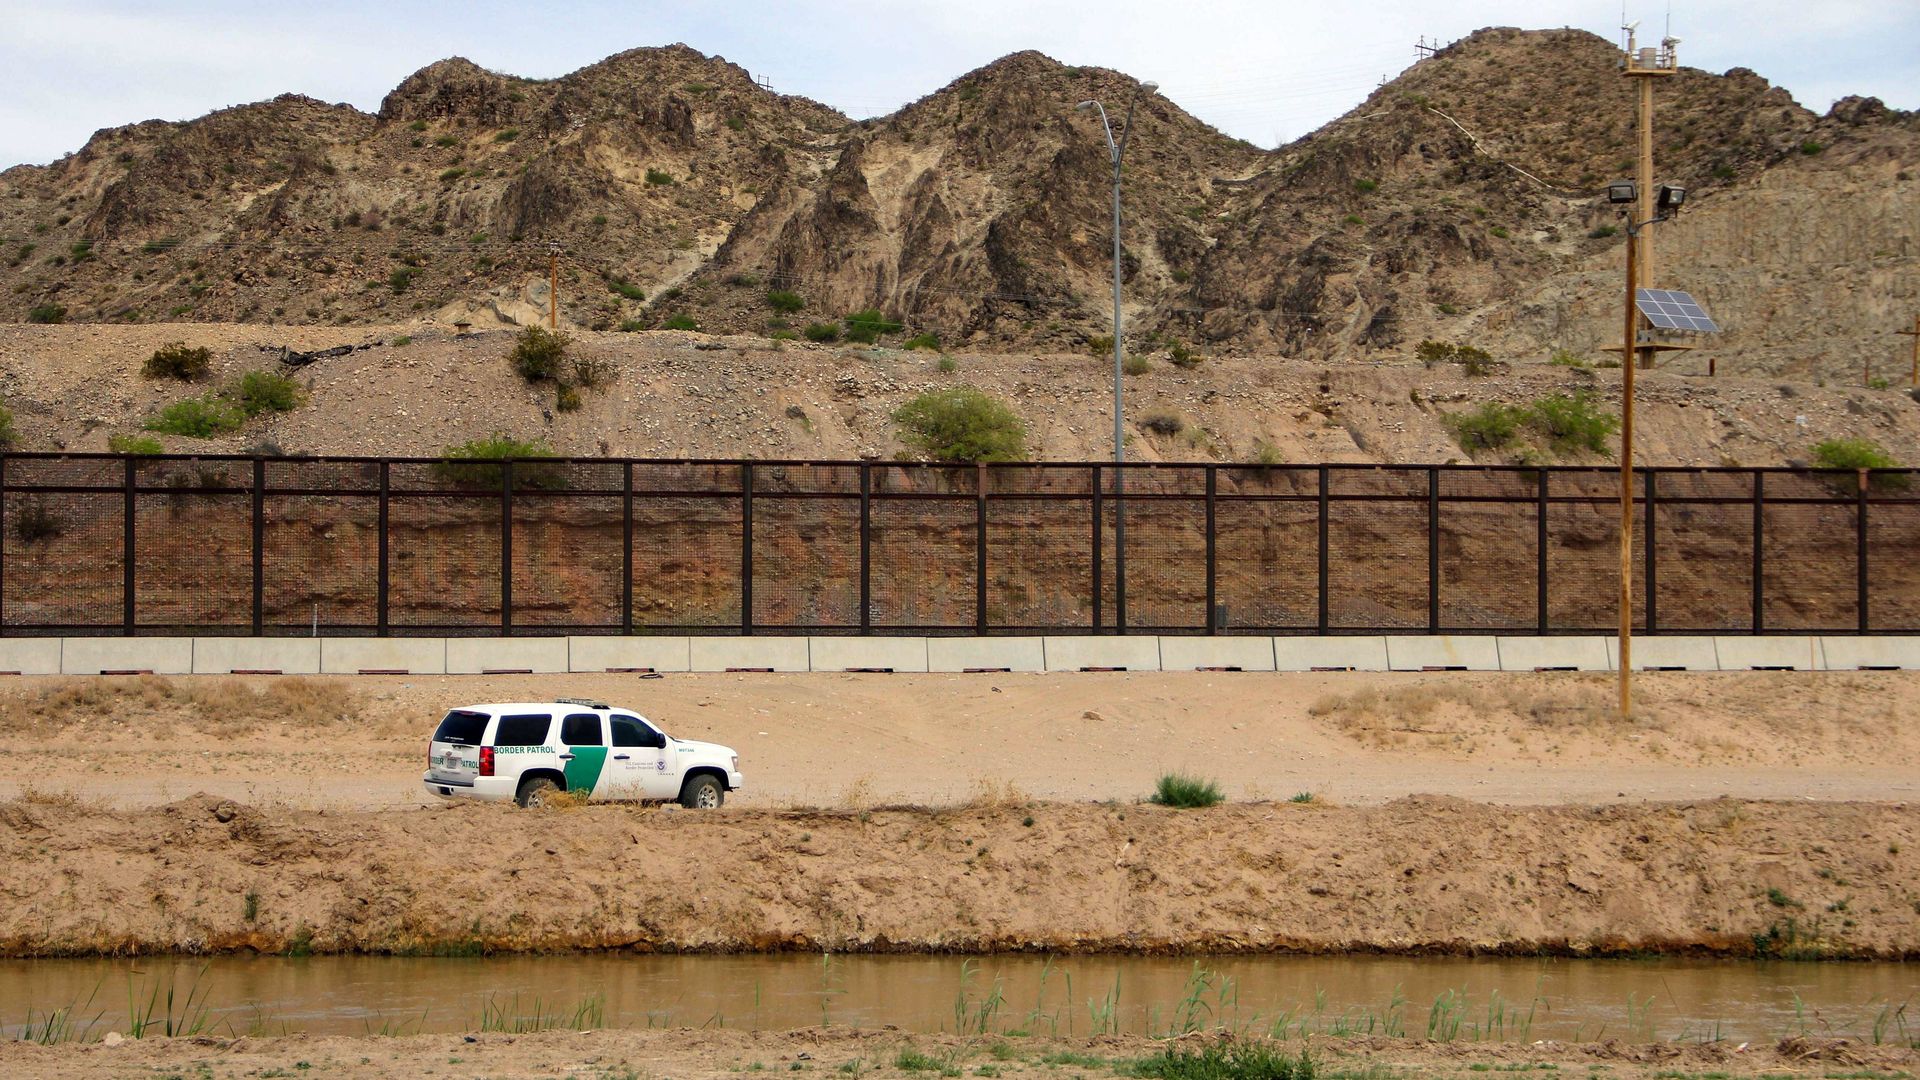 In this image, a border patrol car is parked along chain link fence at the U.S.-Mexico border.